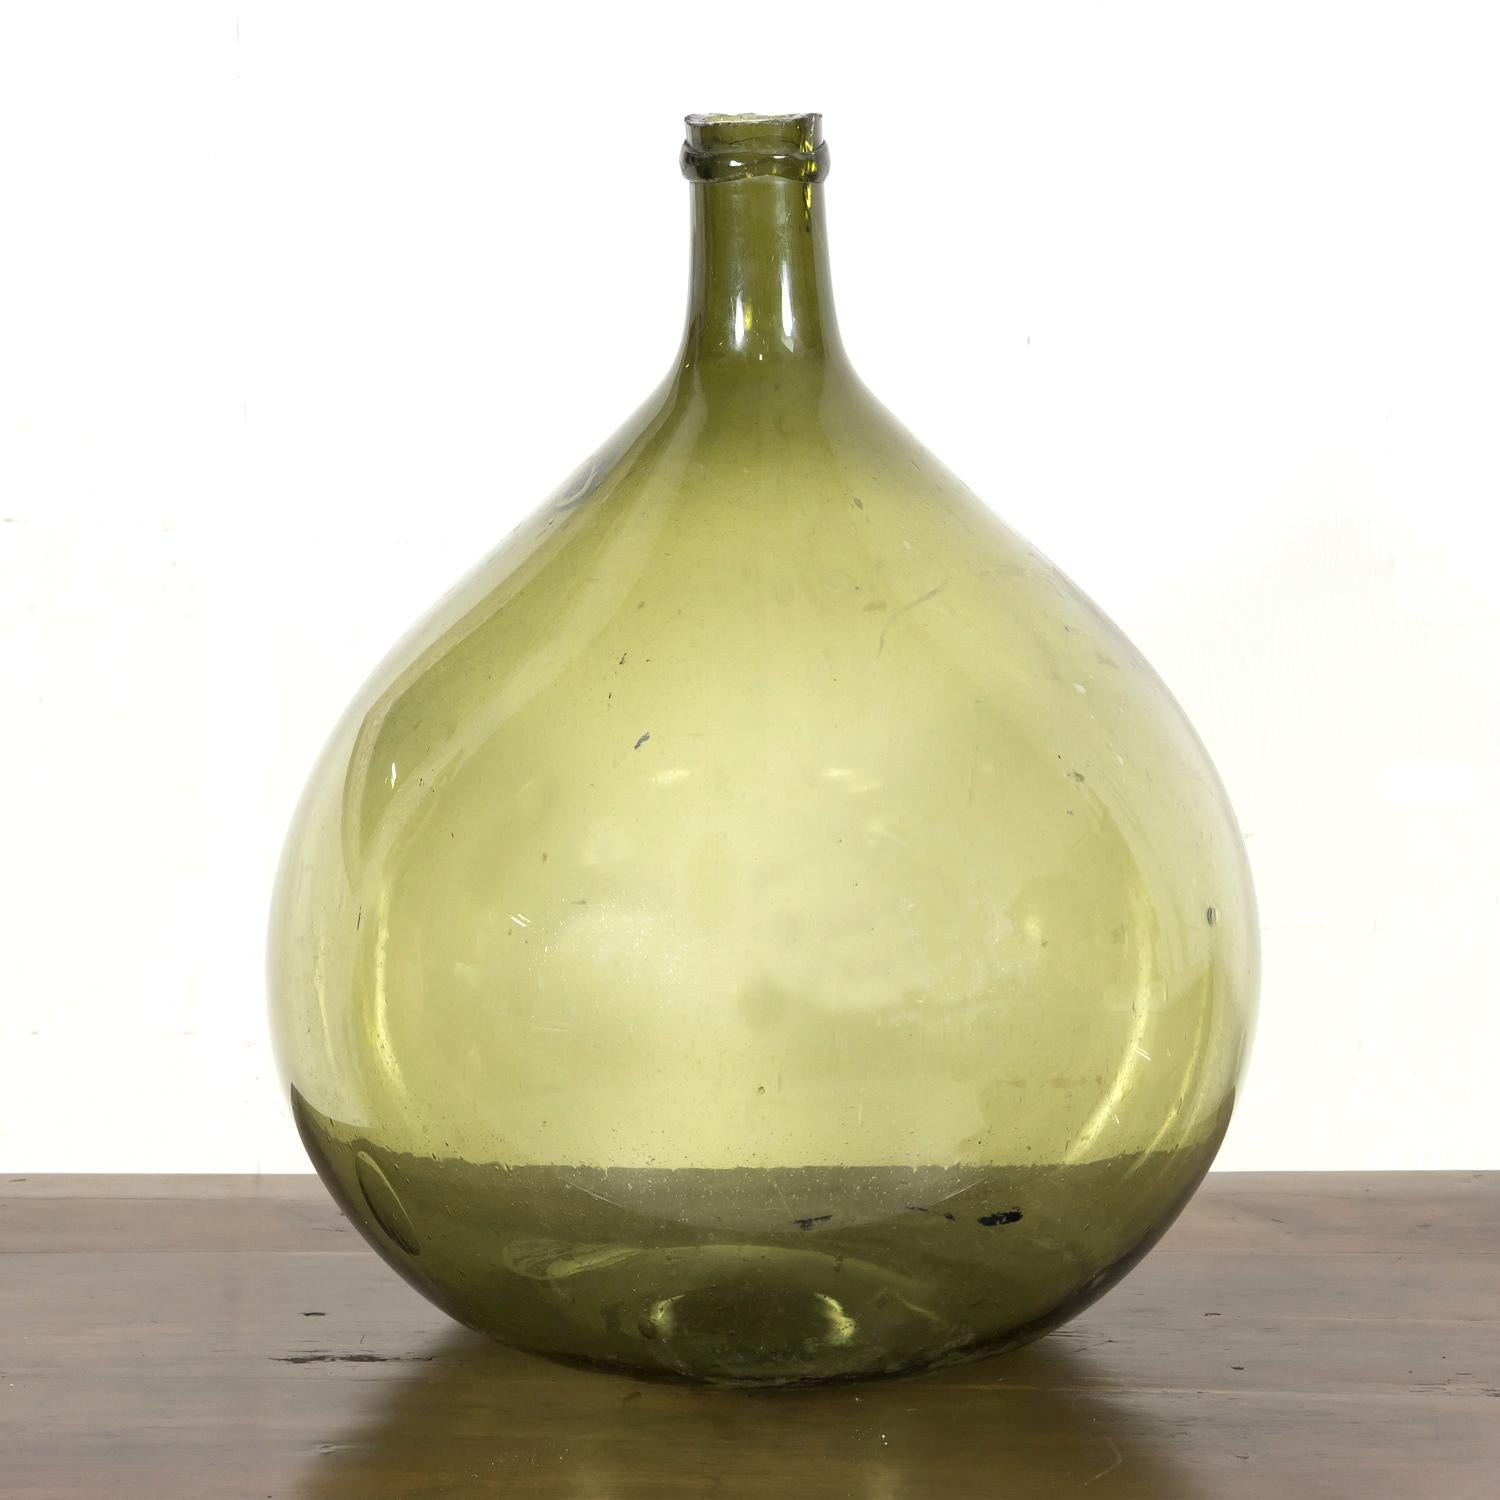 A beautiful 19th century French handblown green glass demijohn or Dame Jeanne bottle, circa 1880s, having a bulbous shape and brightly colored green glass with visible bubbles and no seams, an indication that it was hand blown rather than made with